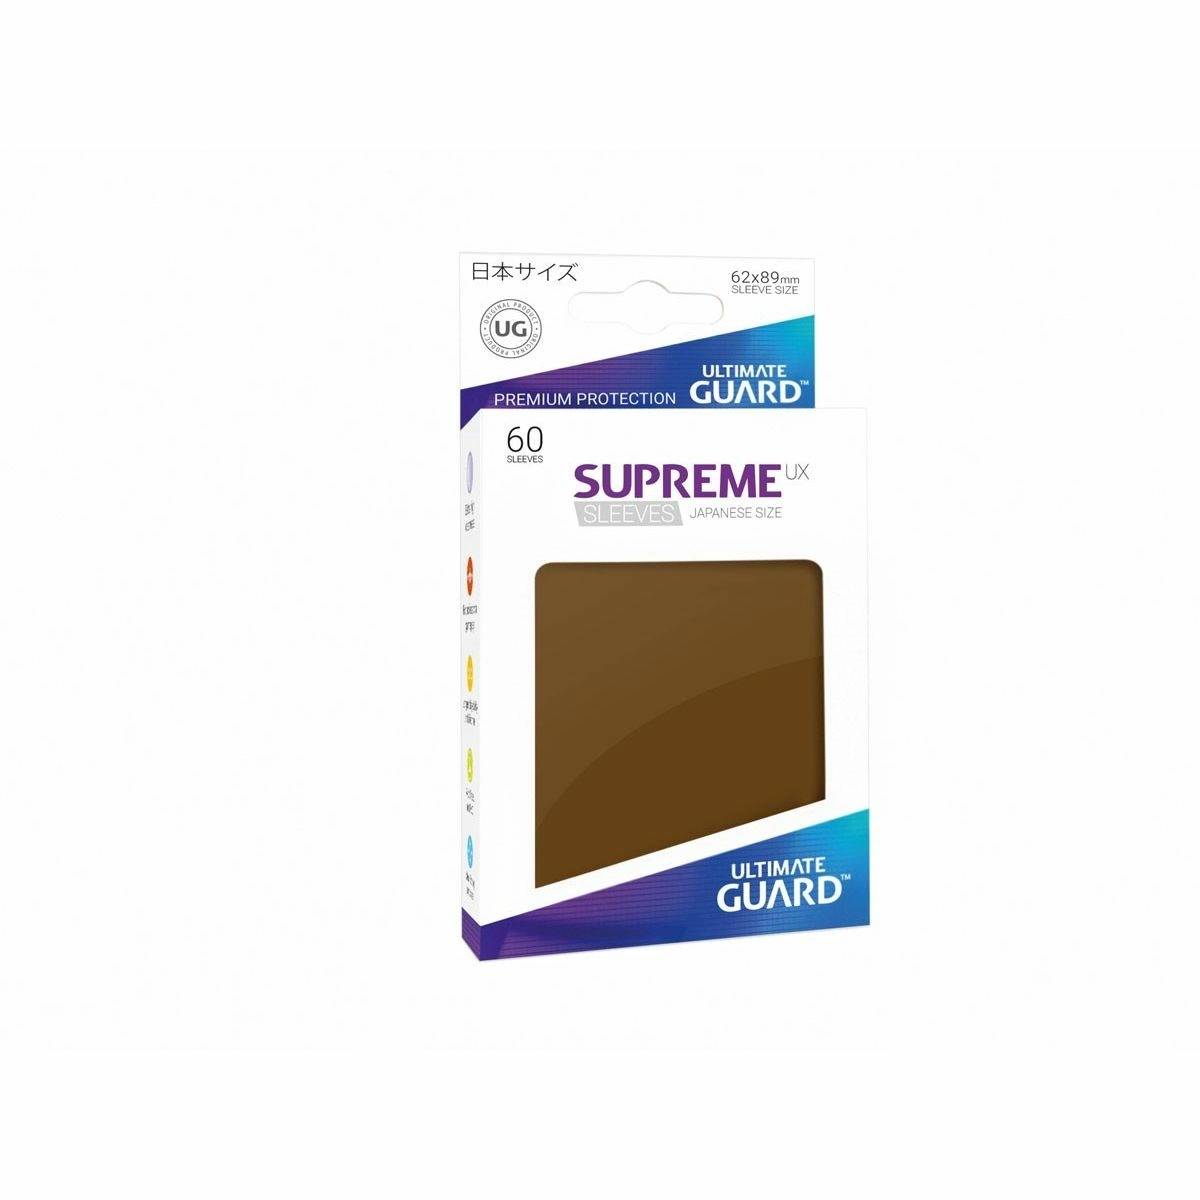 Ultimate Guard - Supreme UX Japanese Size Sleeves Brown (60)